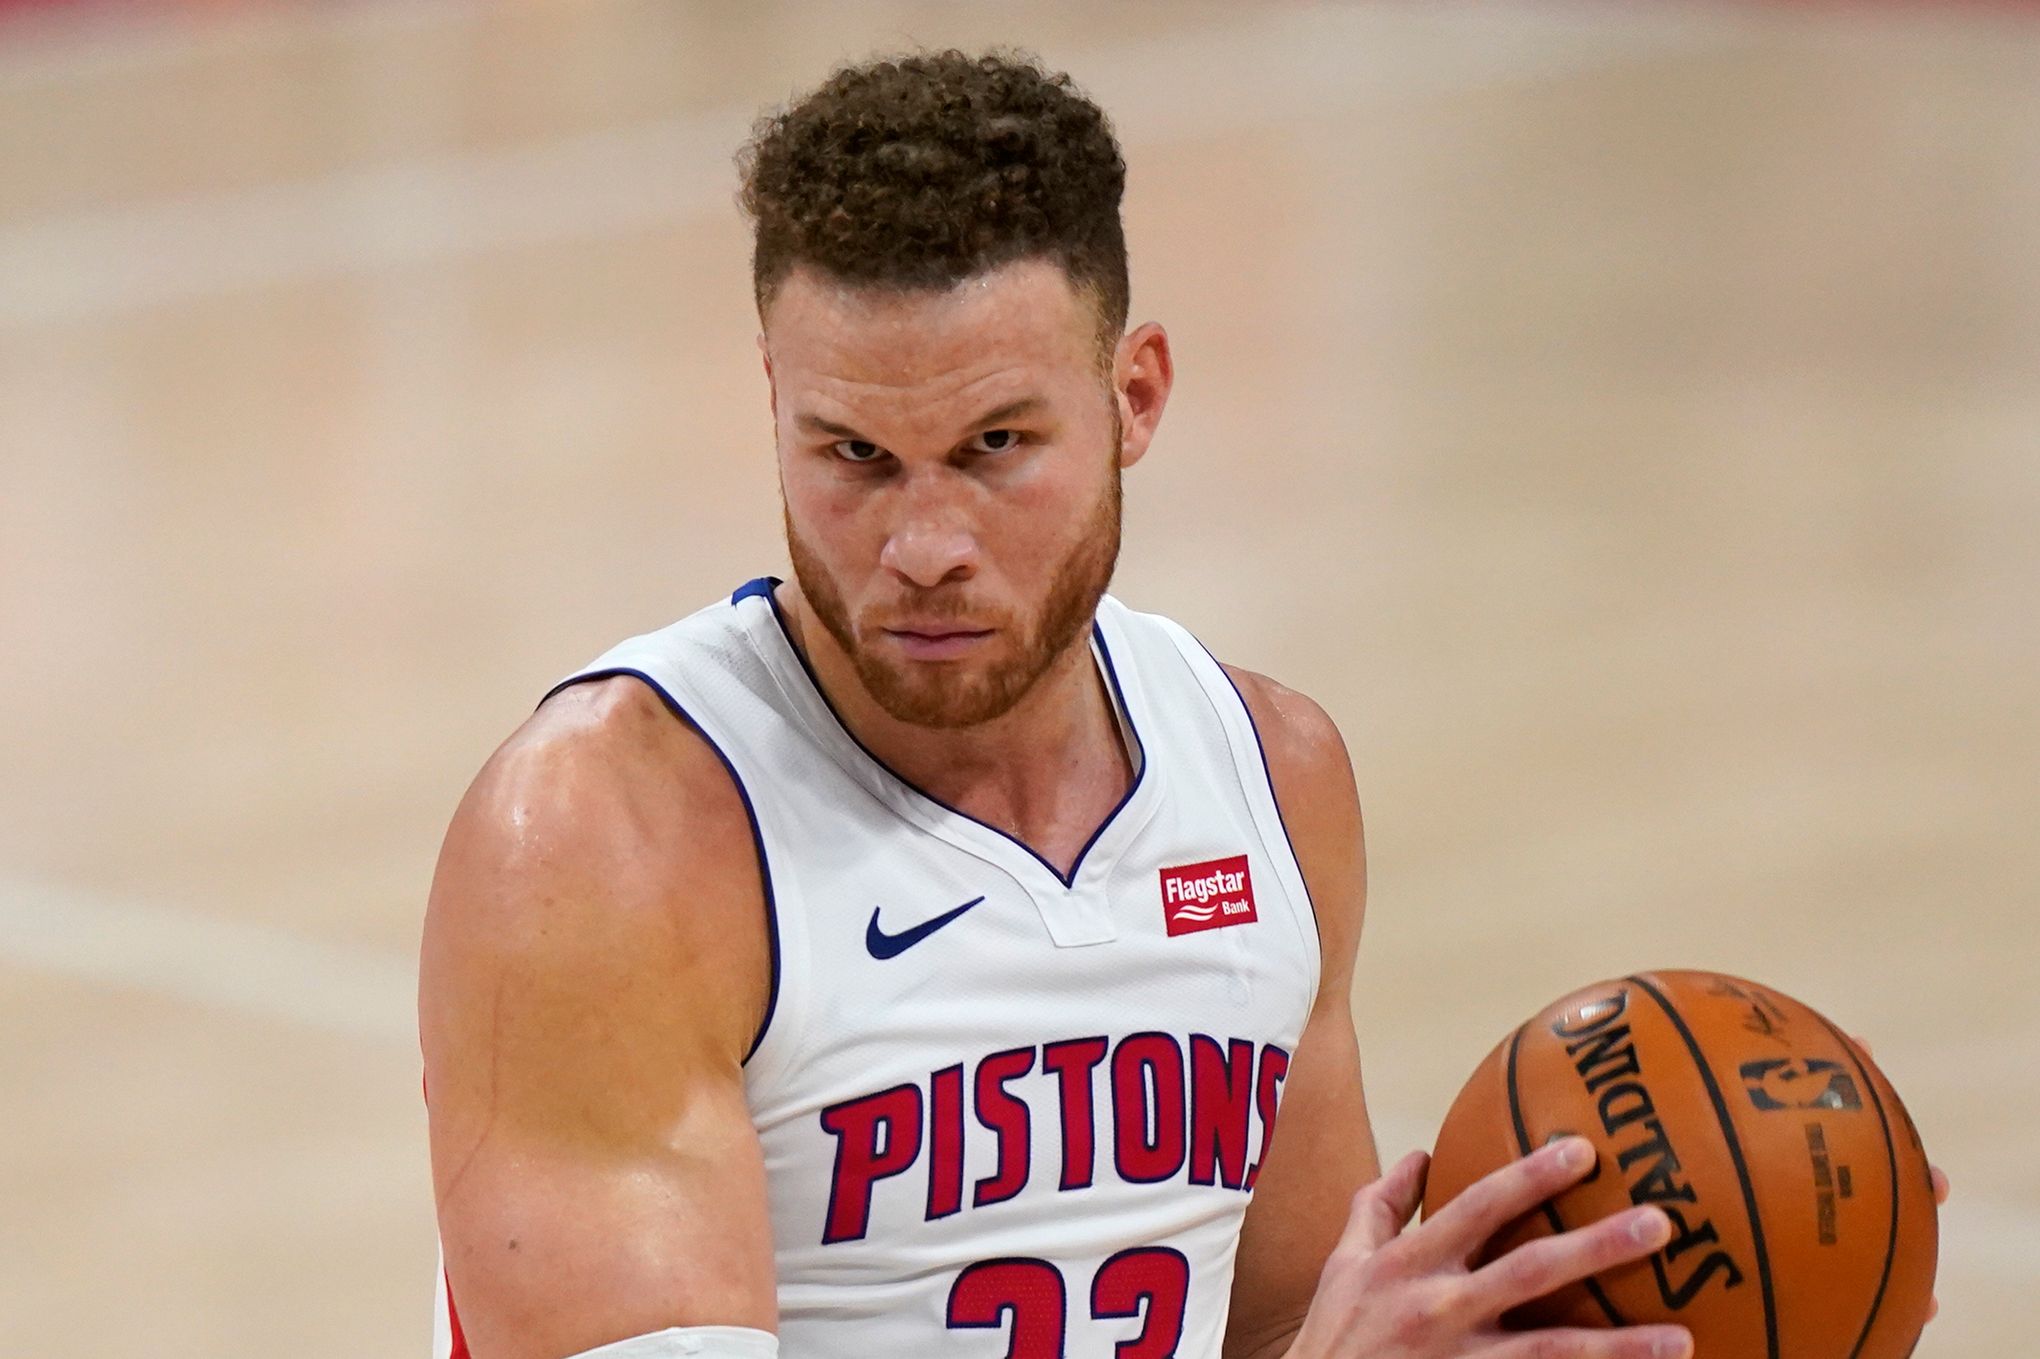 Blake Griffin Agrees to Sign With the Nets - The New York Times